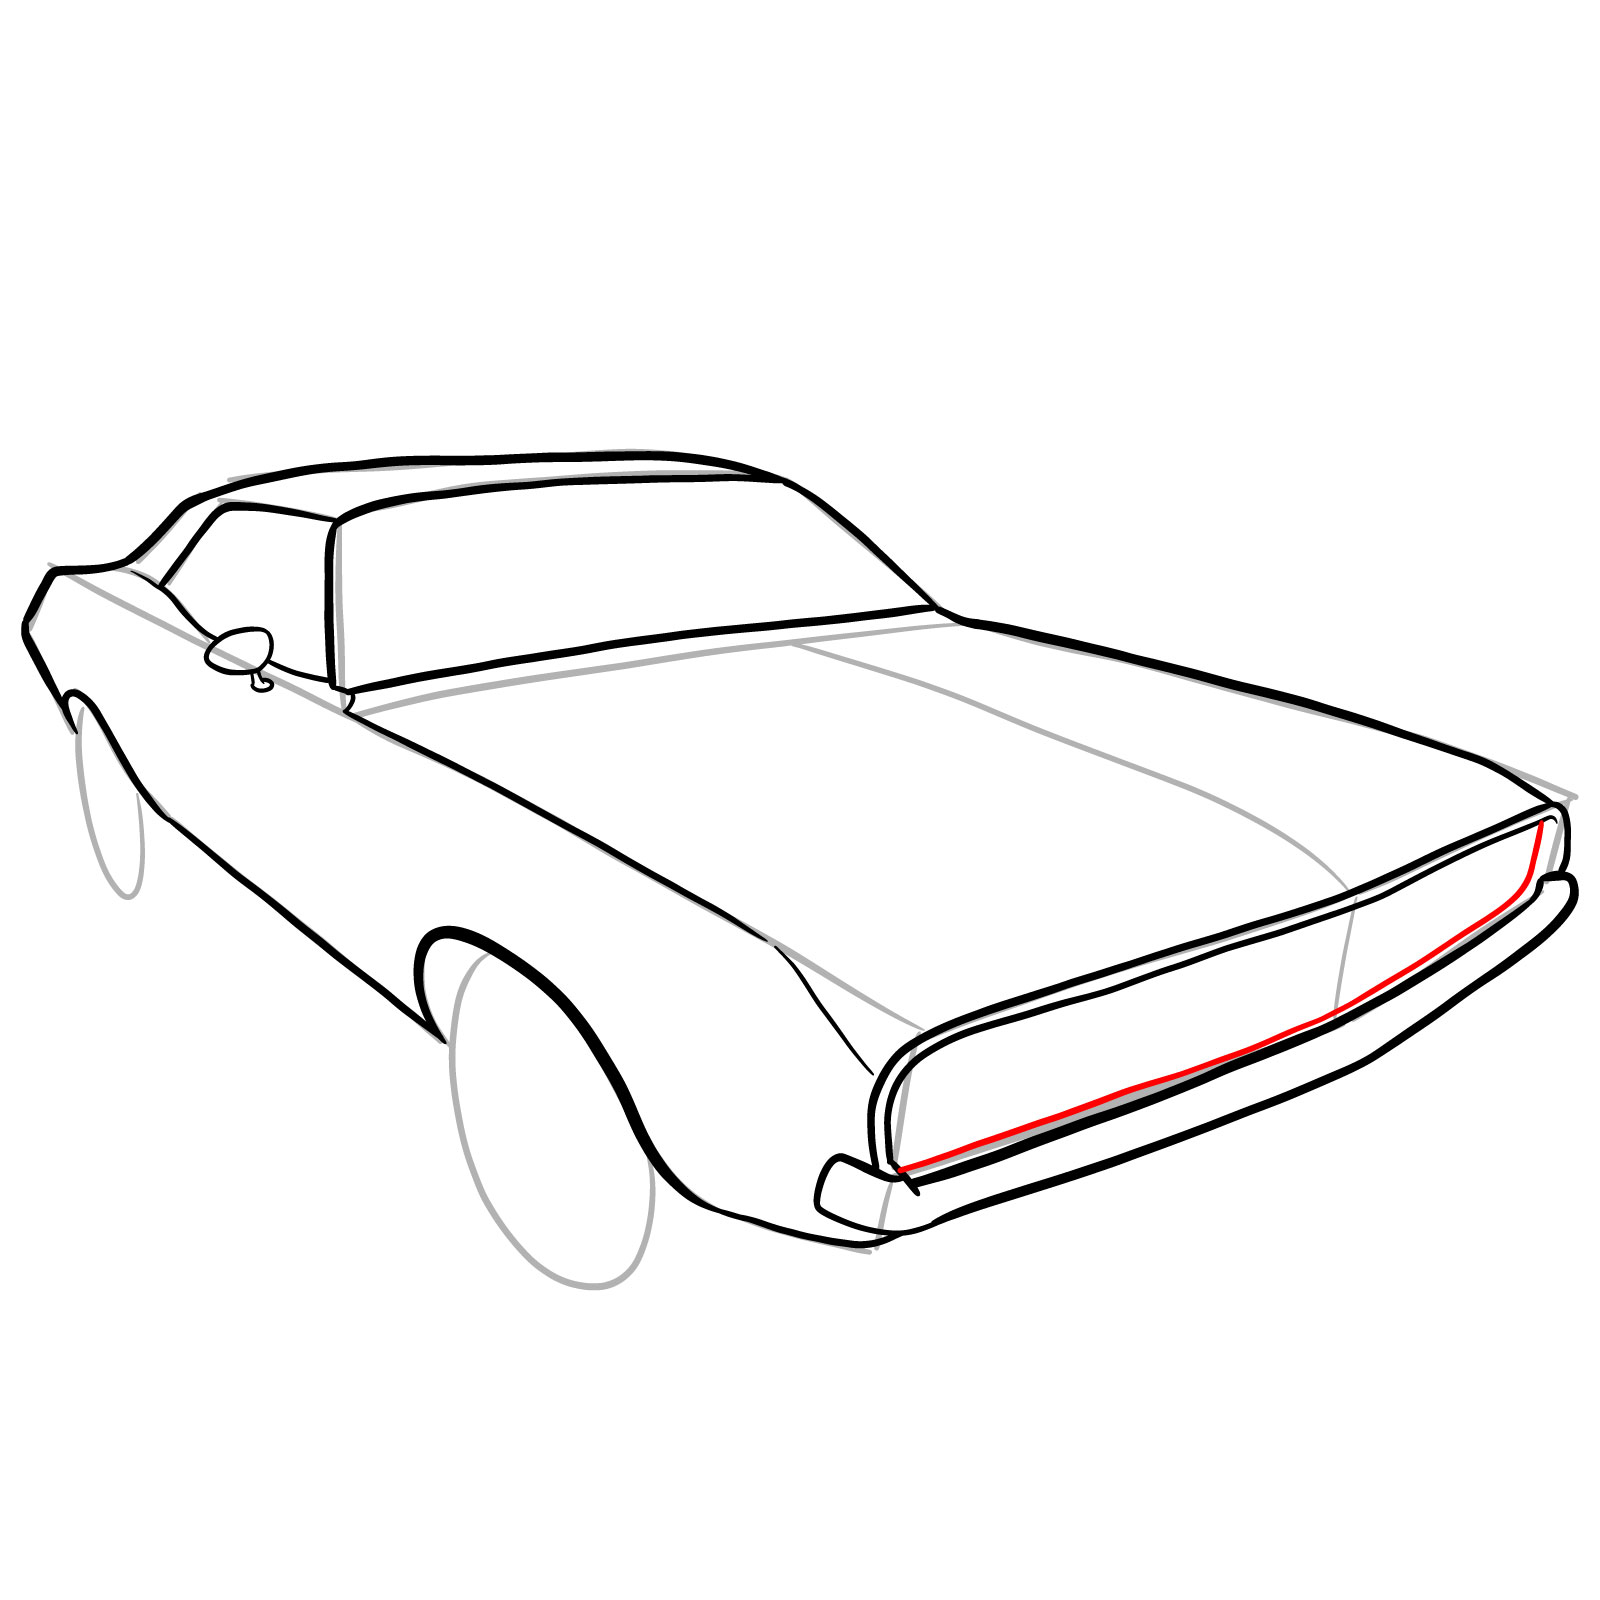 How to draw Dodge Challenger 1970 - step 18